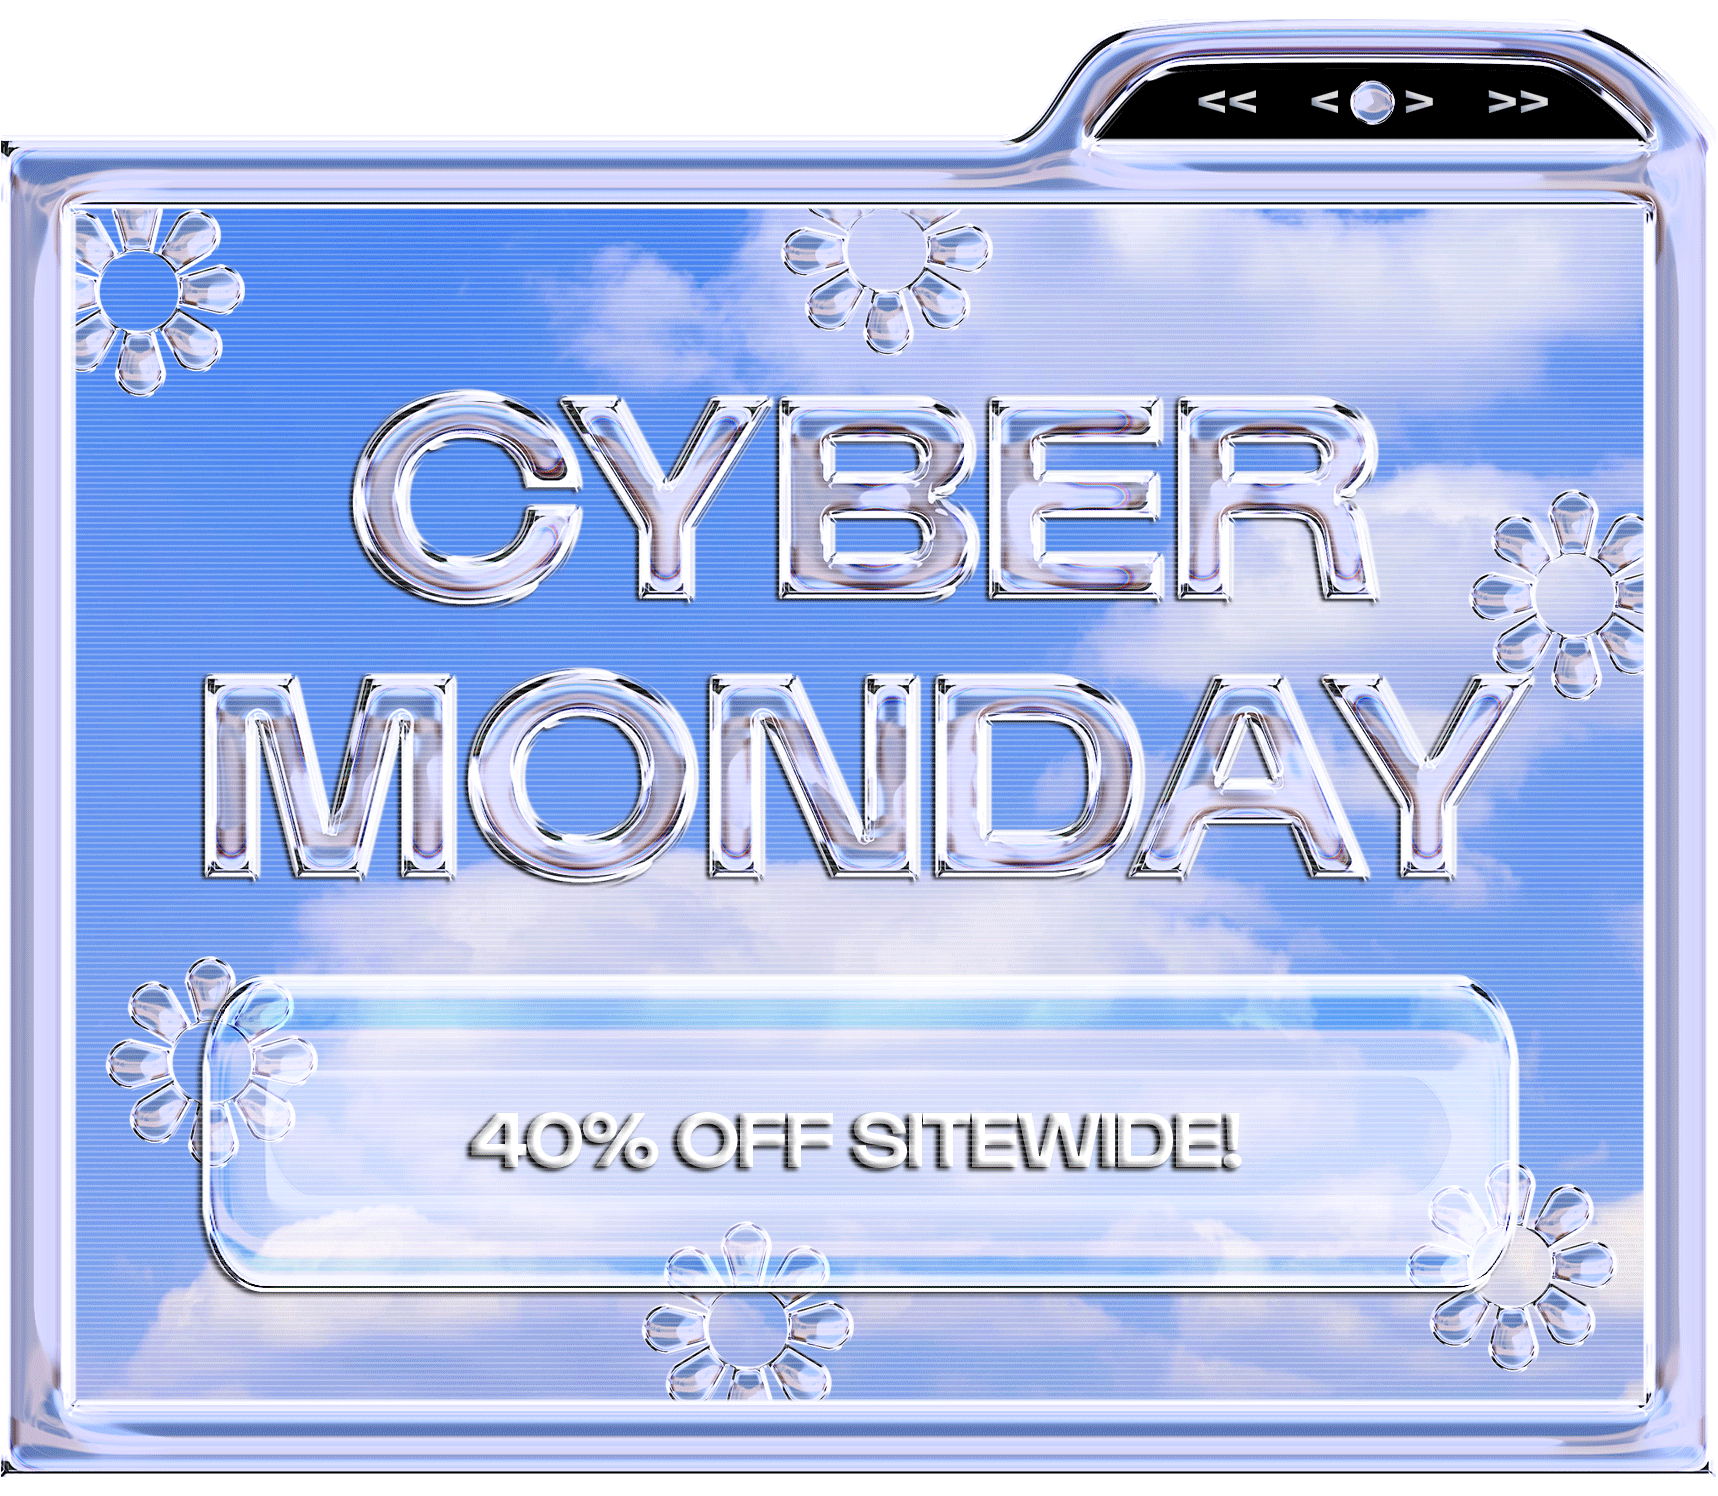 Cyber Monday is here!